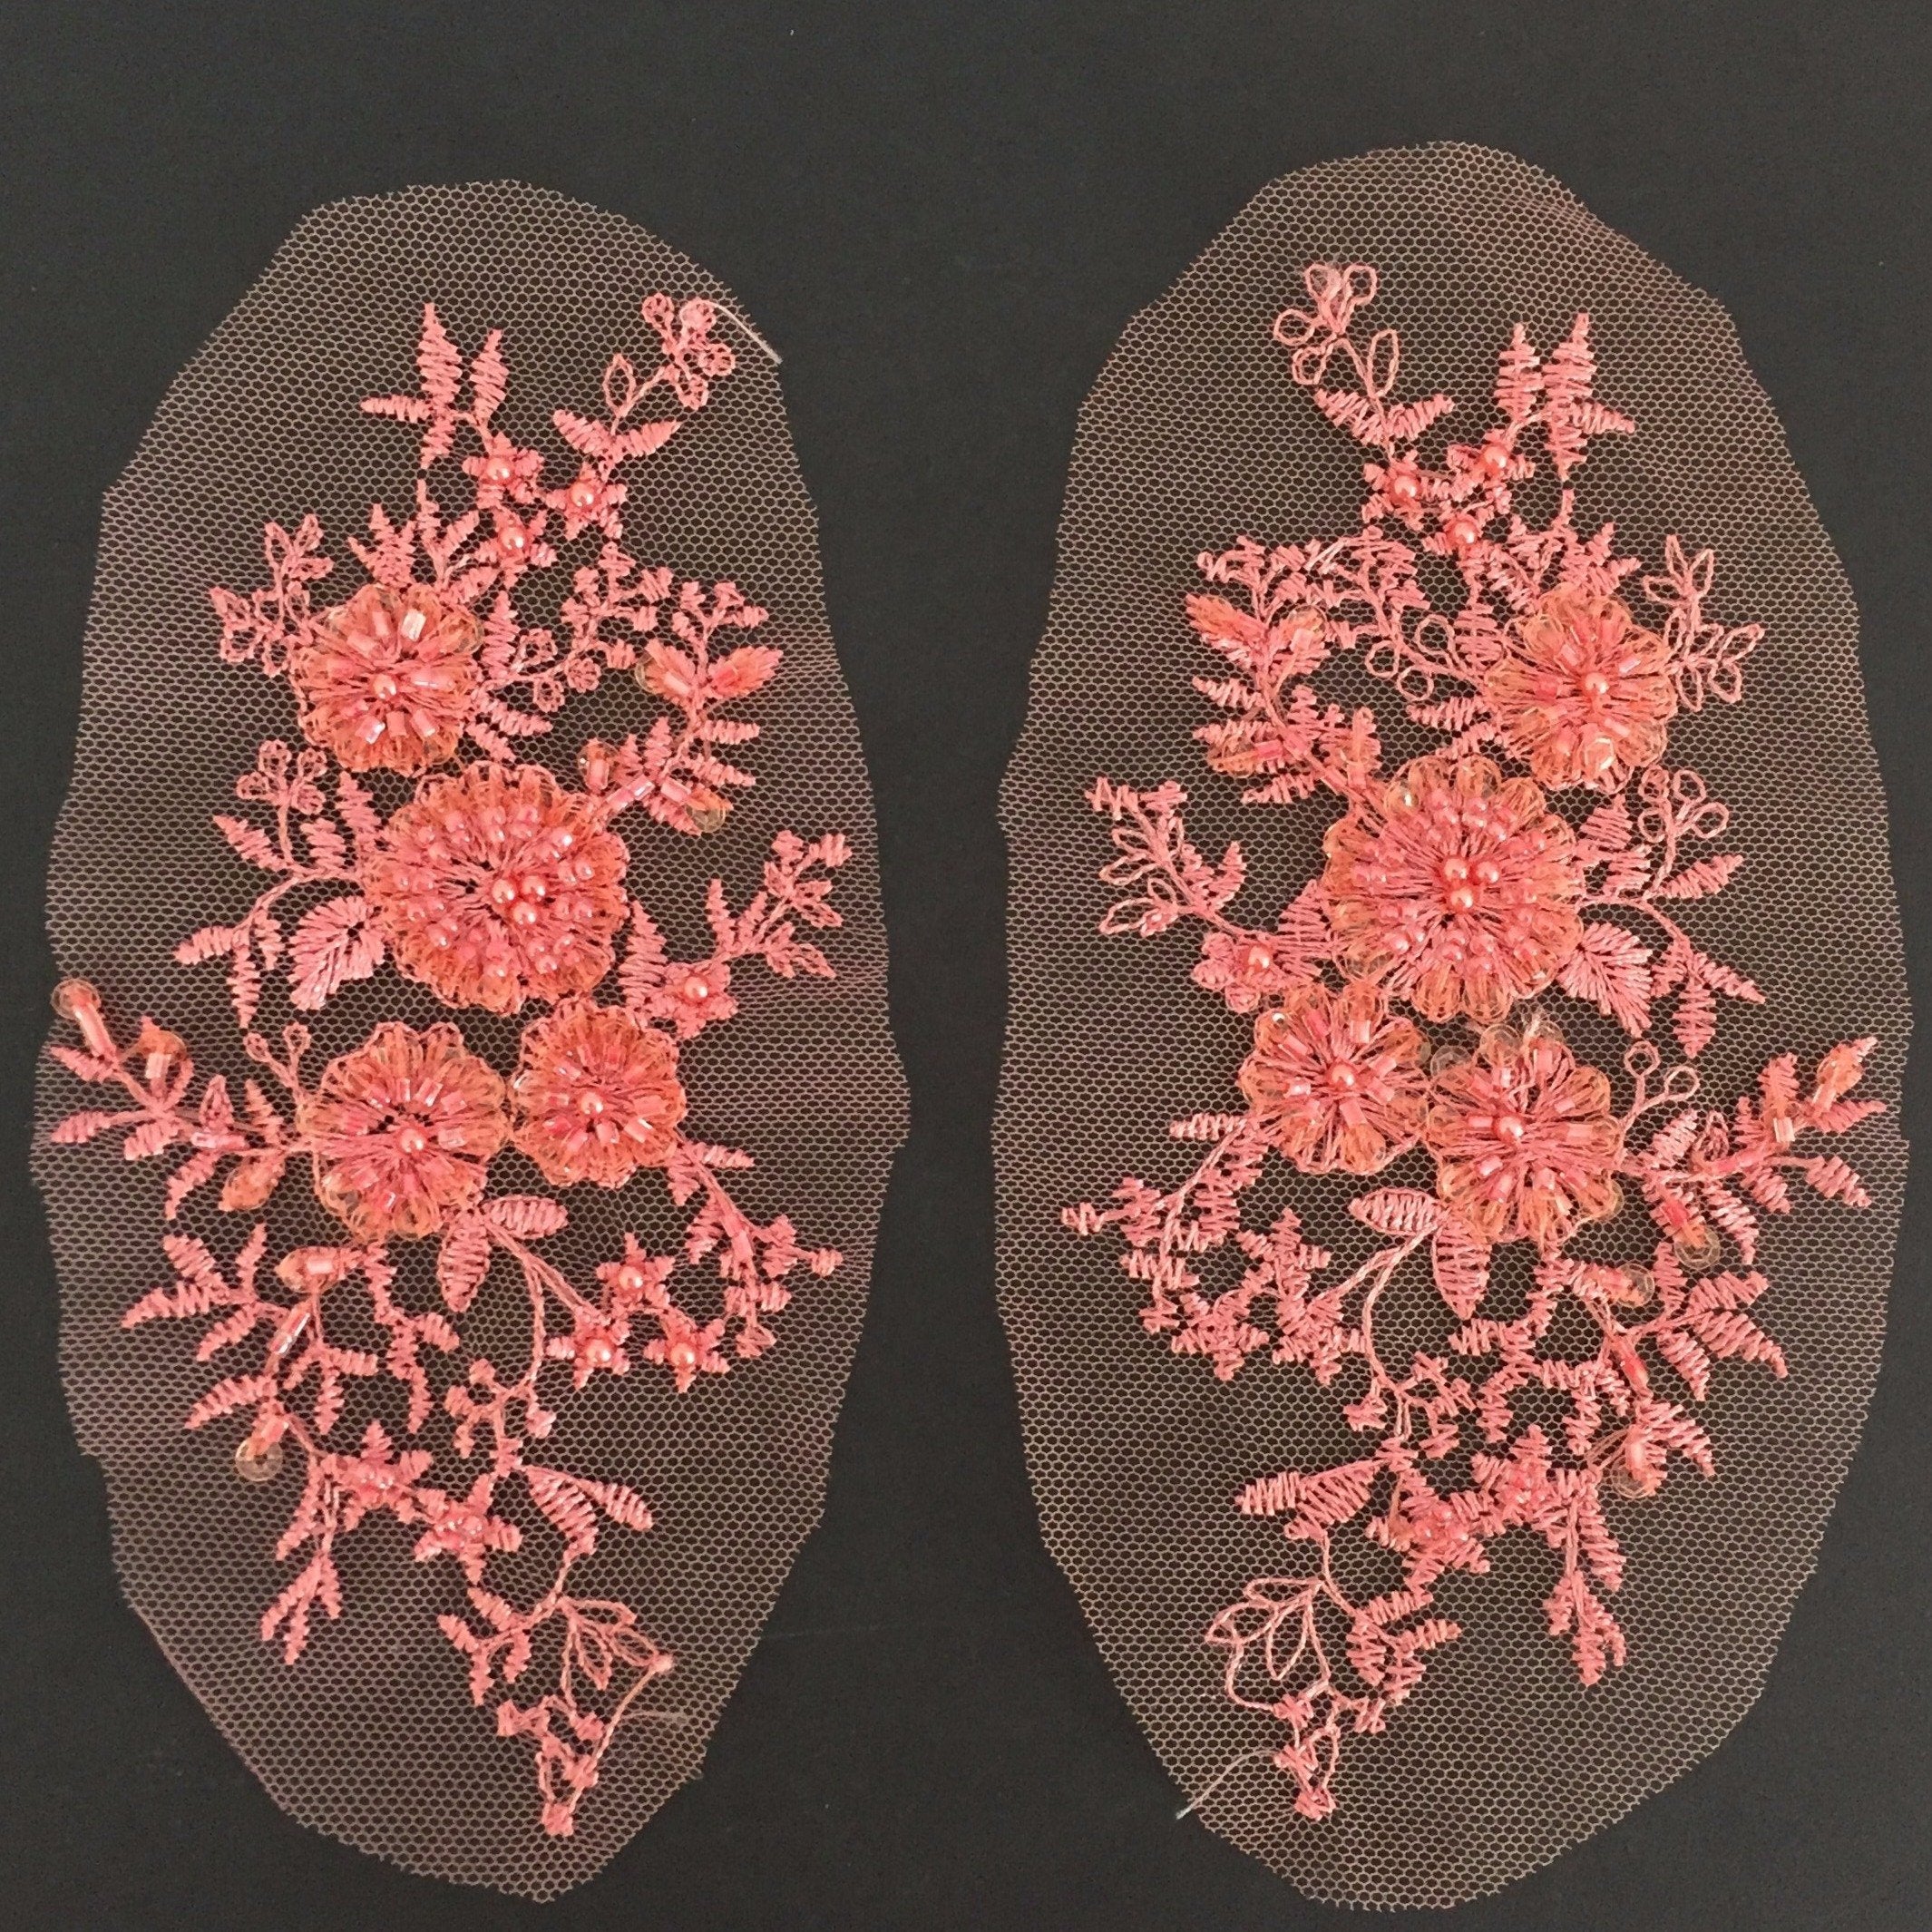 The applique comes as a mirrored pair which makes it perfect for achieving symmetrical bodice or costume designs. Heavily beaded apricot flowers are the focal point of the applique . Embroidered onto fine net , stems and leaves  surround the central flowers